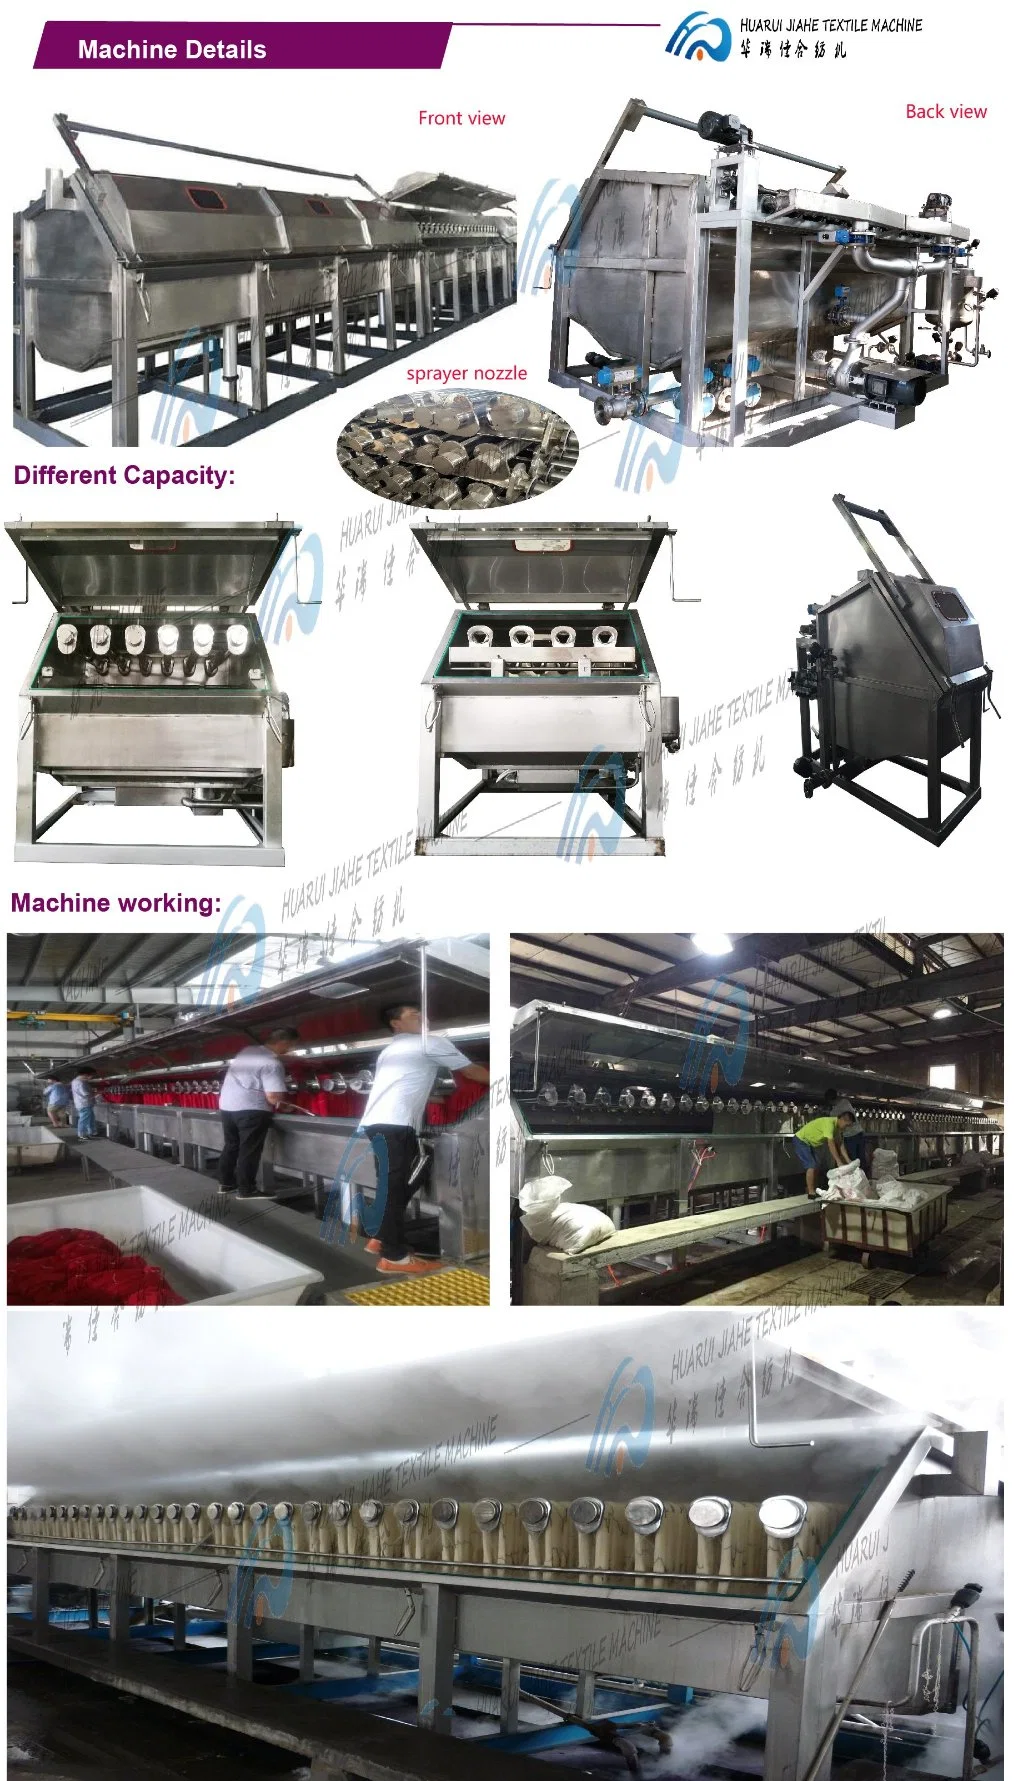 Normal Temp Automatic Energy Saving Low Liquor Ratio Spray Hank Dyeing Machine, Made in China, Skein Dyeing Machine